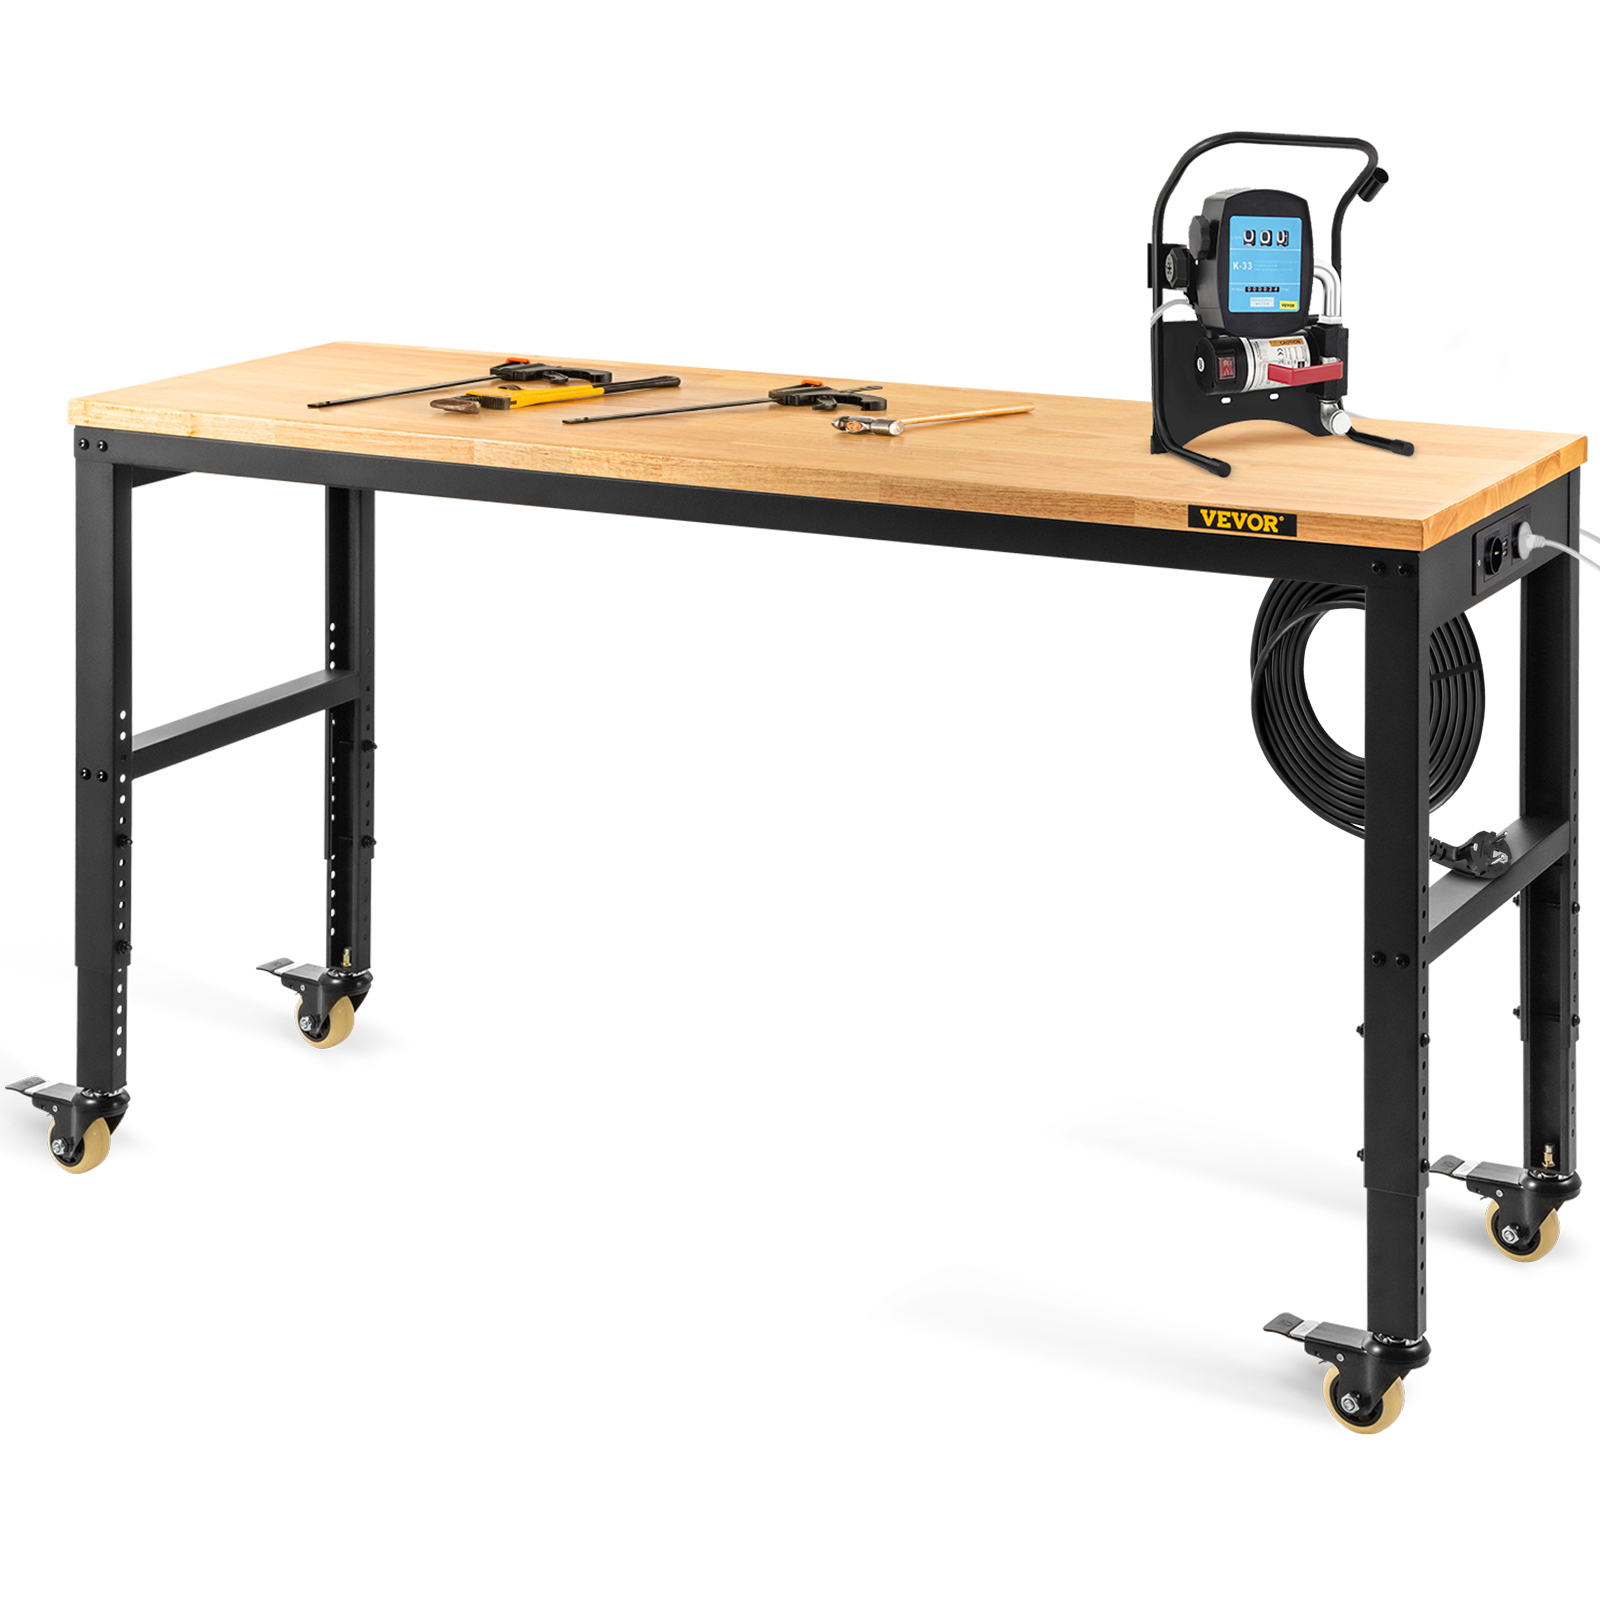 VEVOR workbench work table 122x61x97 cm clamping table 900 kg adjustable